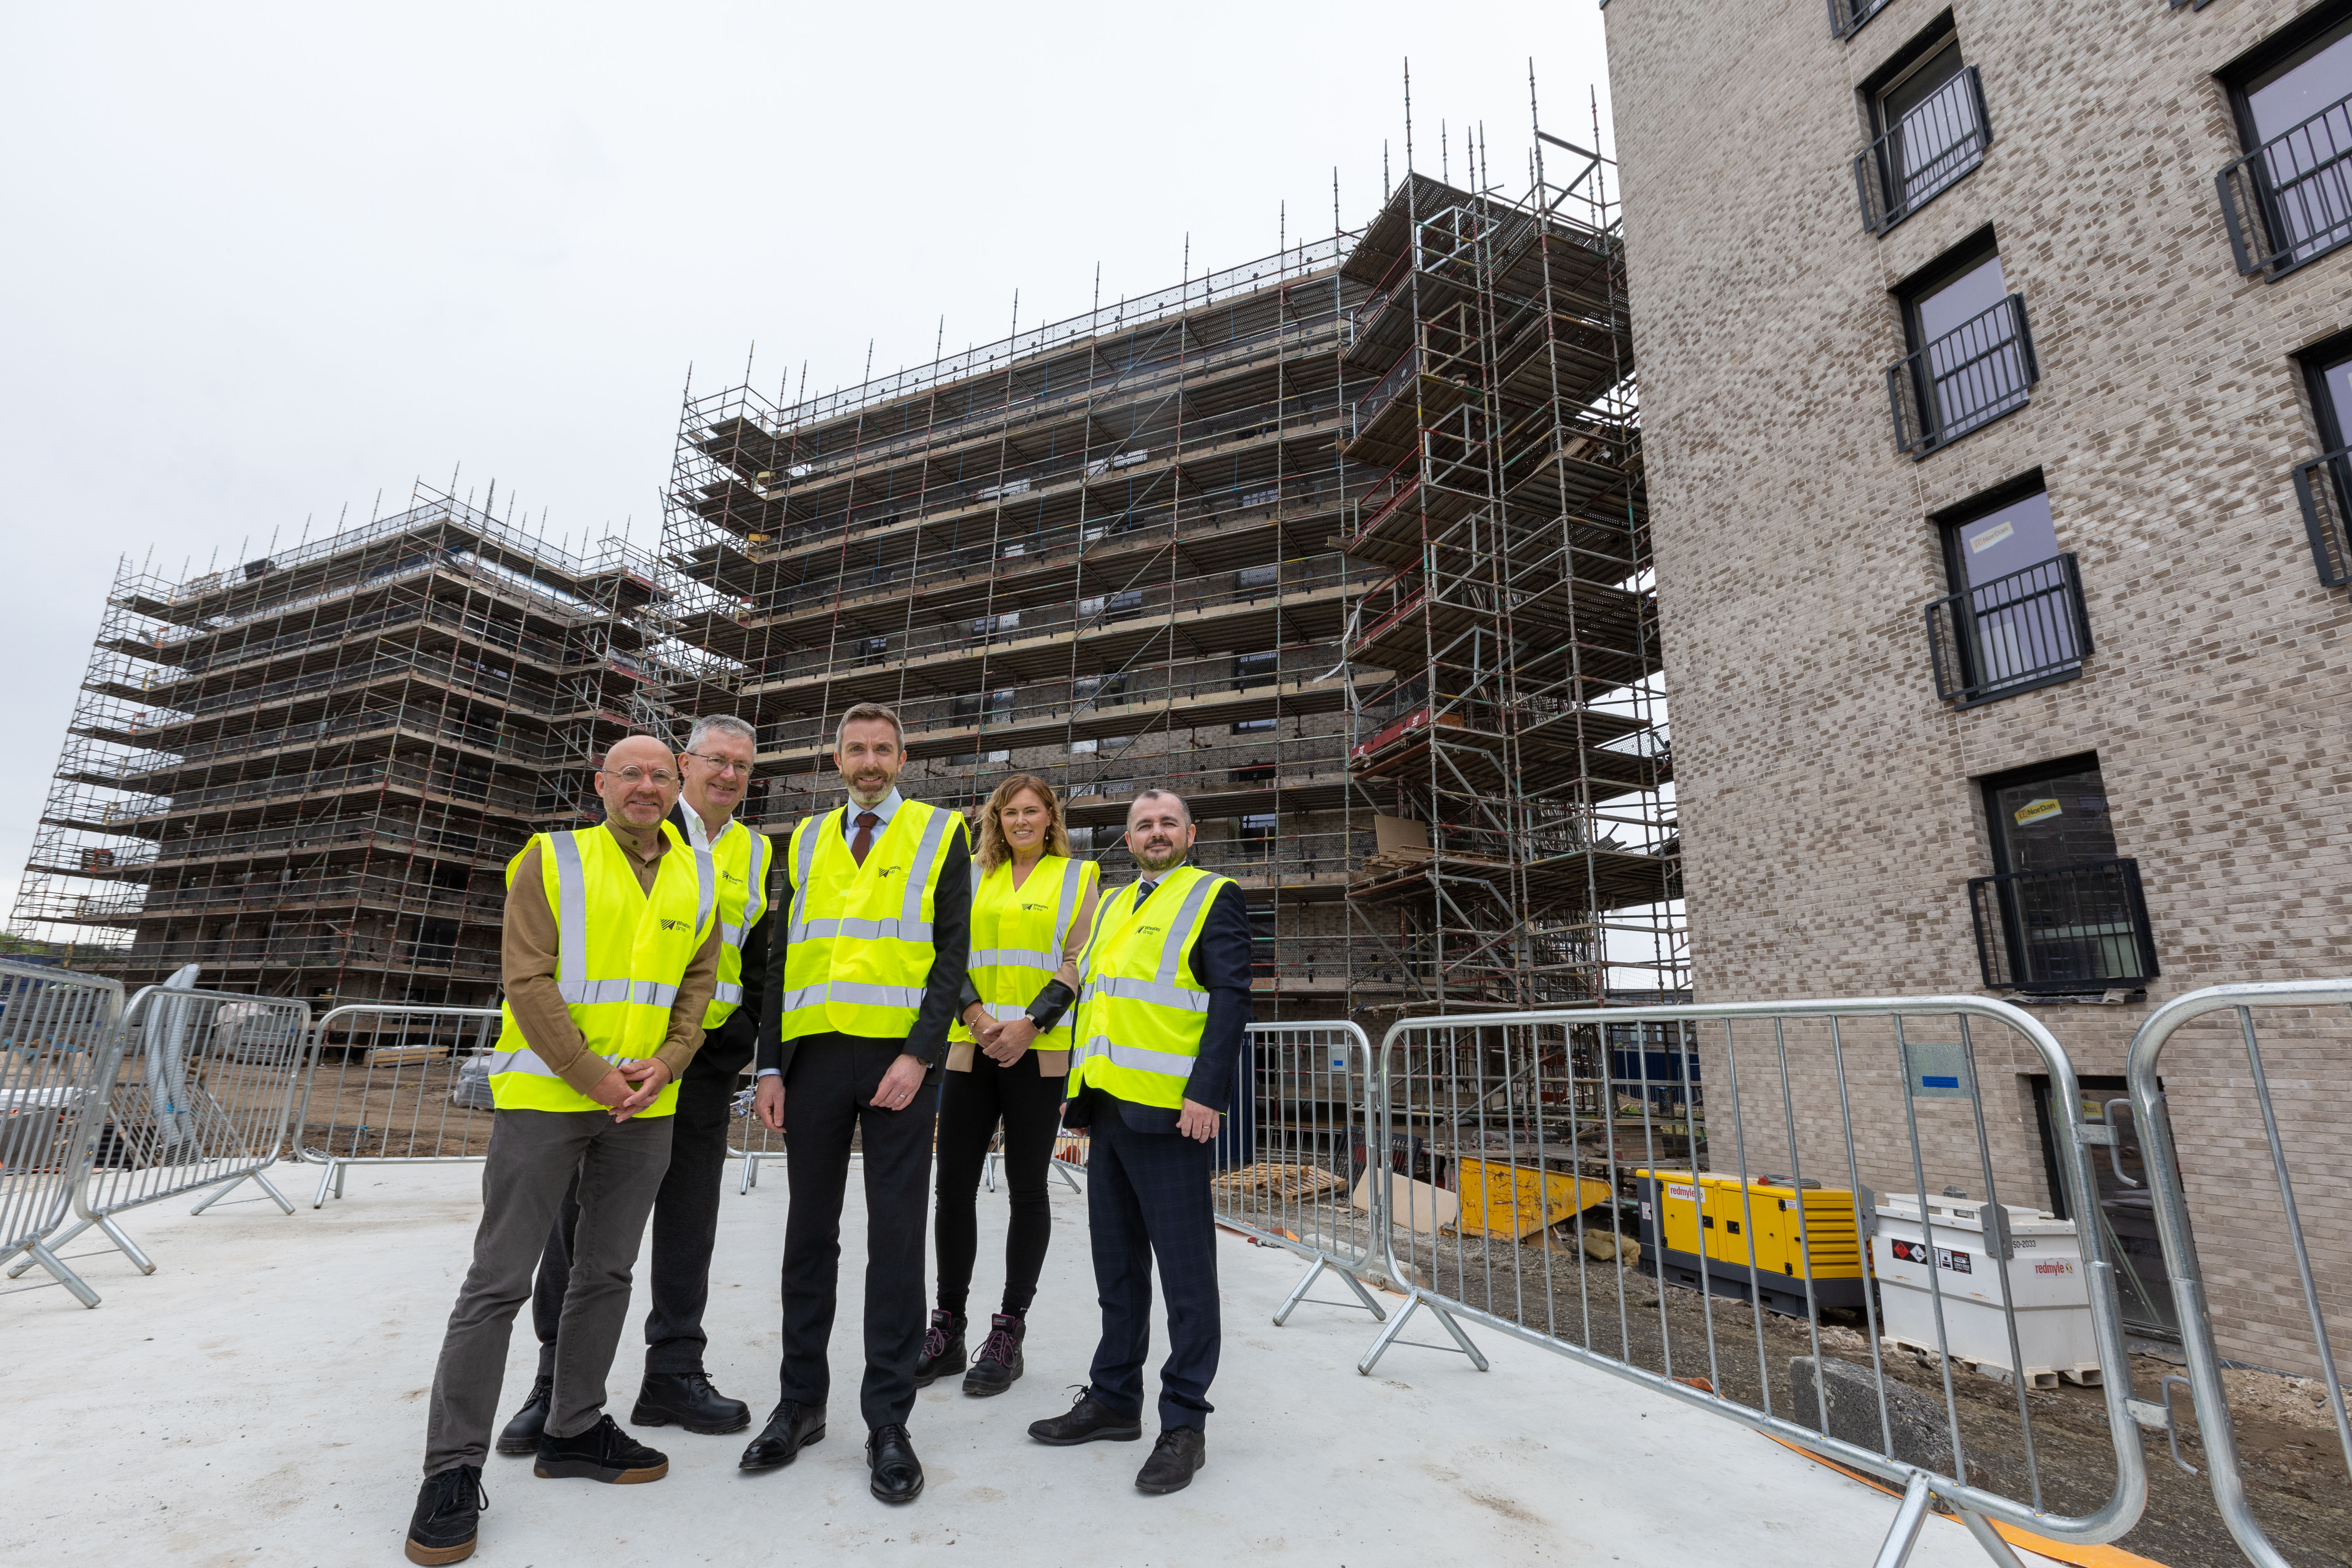 Minister hails Wheatley’s ‘valuable role’ in increasing range of housing for rent